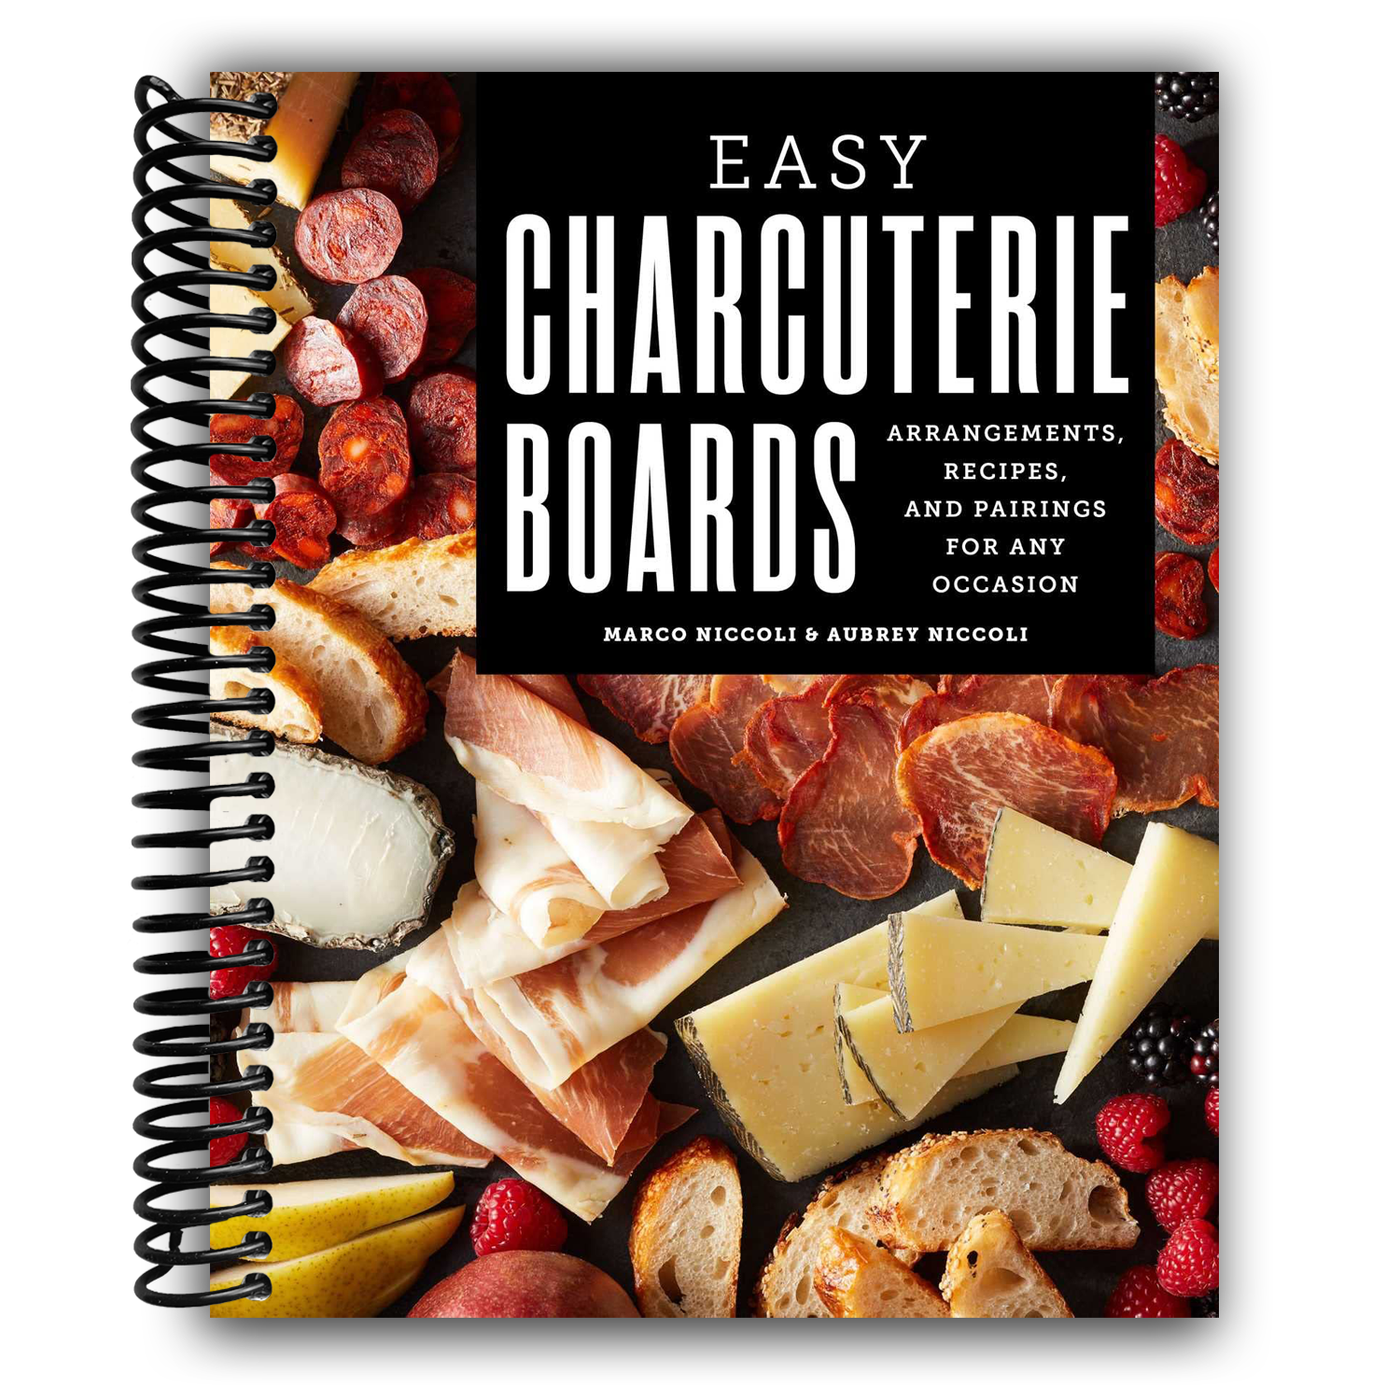 Easy Charcuterie Boards: Arrangements, Recipes, and Pairings for Any Occasion (Spiral Bound)